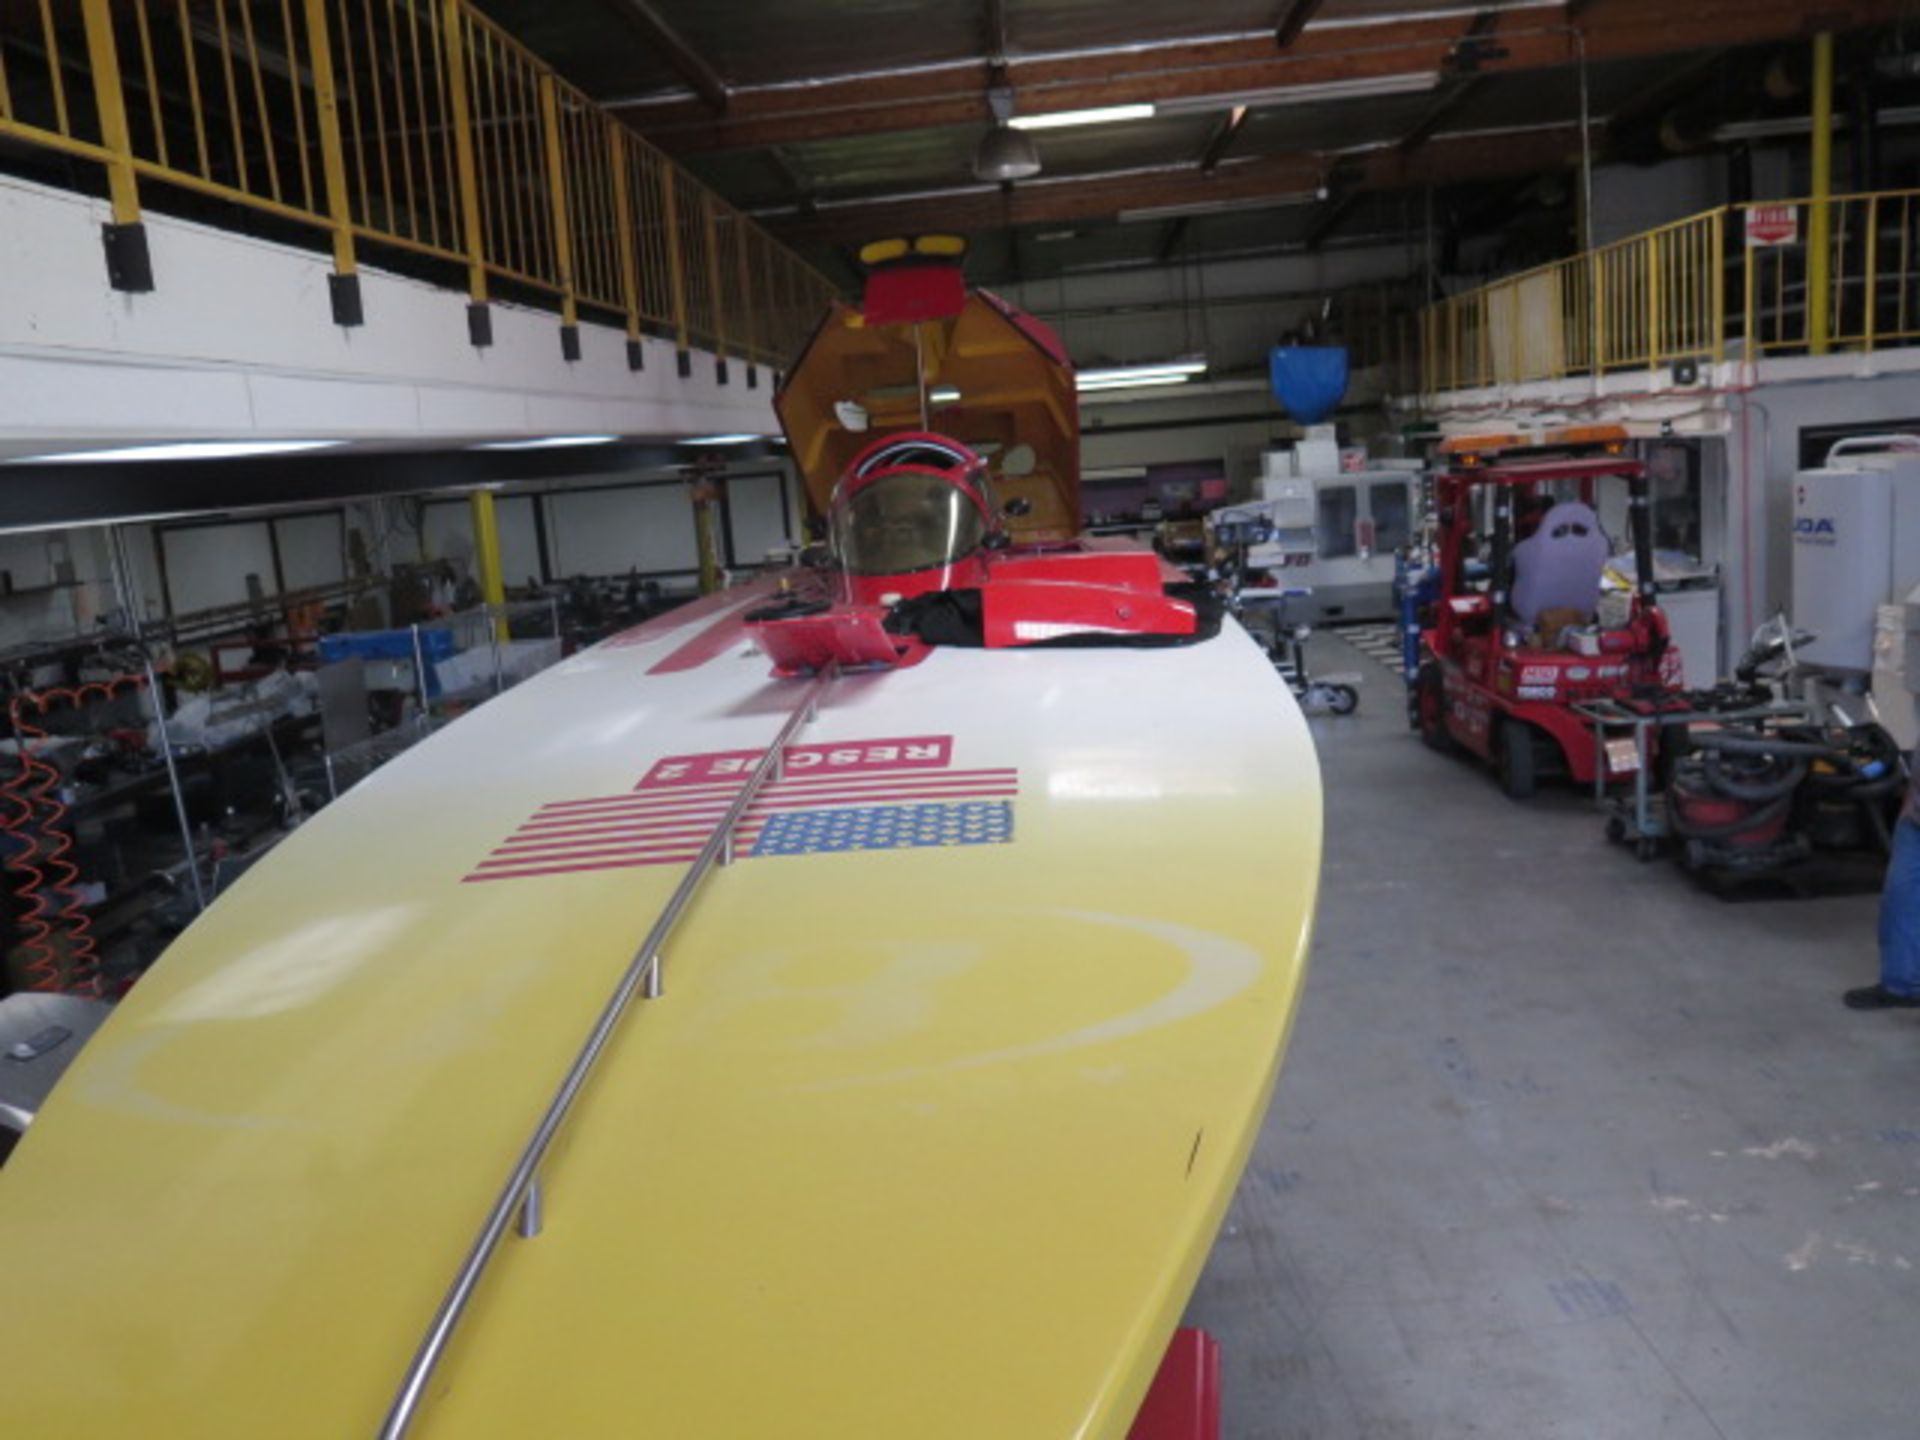 42’ Fountain Super V Race Boat w/ Fill Canopy (Former Worlds Fastest Super V Hull)142.3, SOLD AS IS - Image 10 of 37